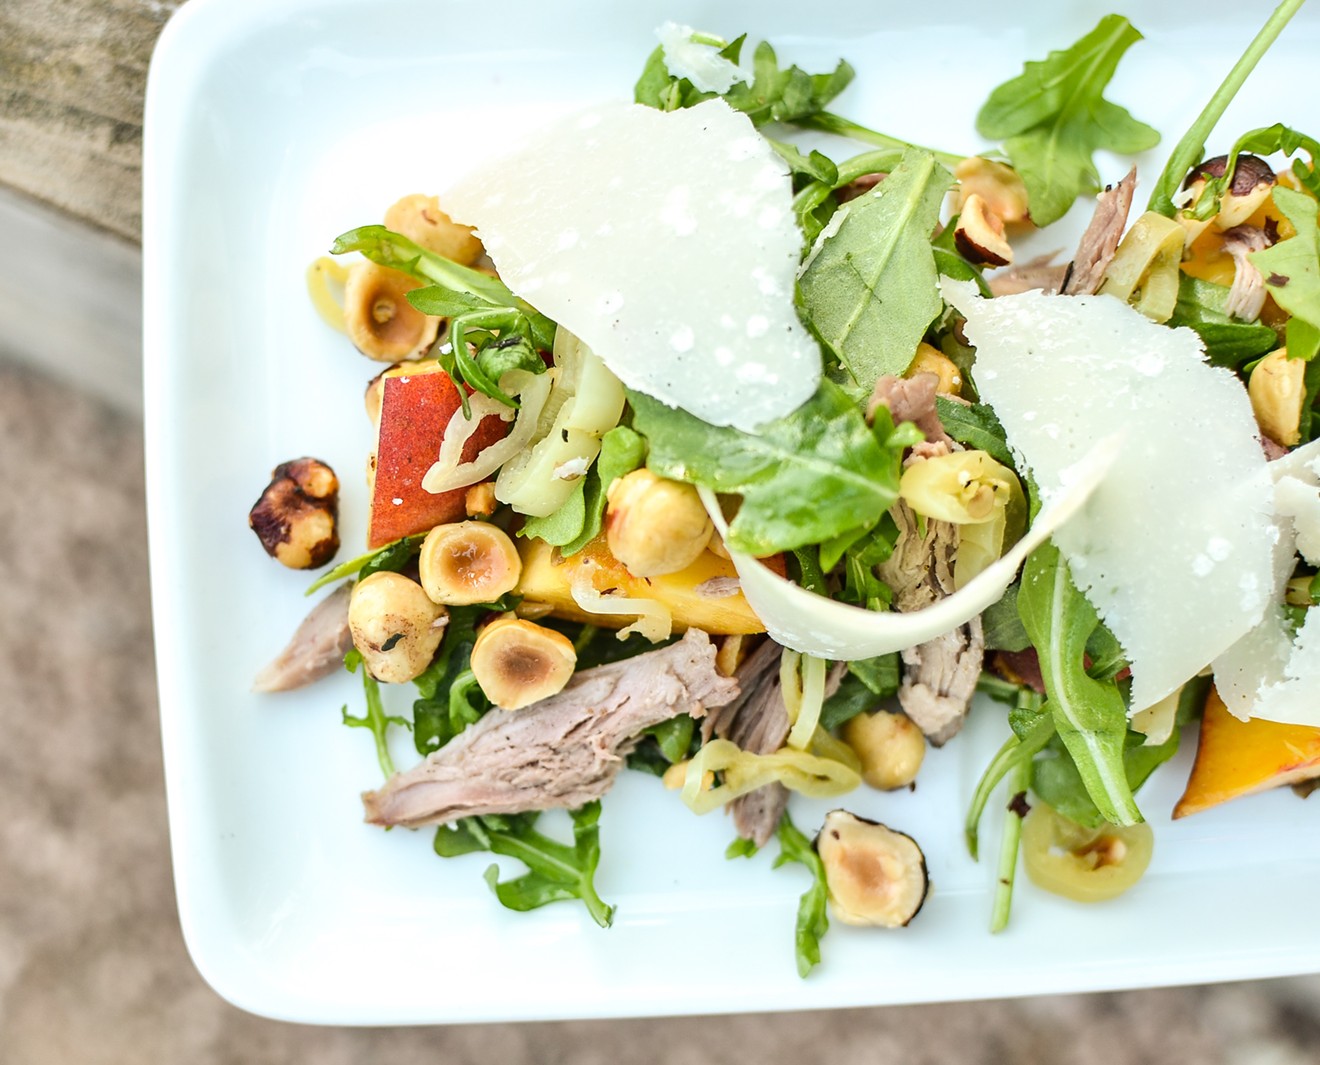 Texas peaches, braised duck, pickled peppers, chilies, hazelnuts, arugula and Parmesan grace this salad at Coltivare.